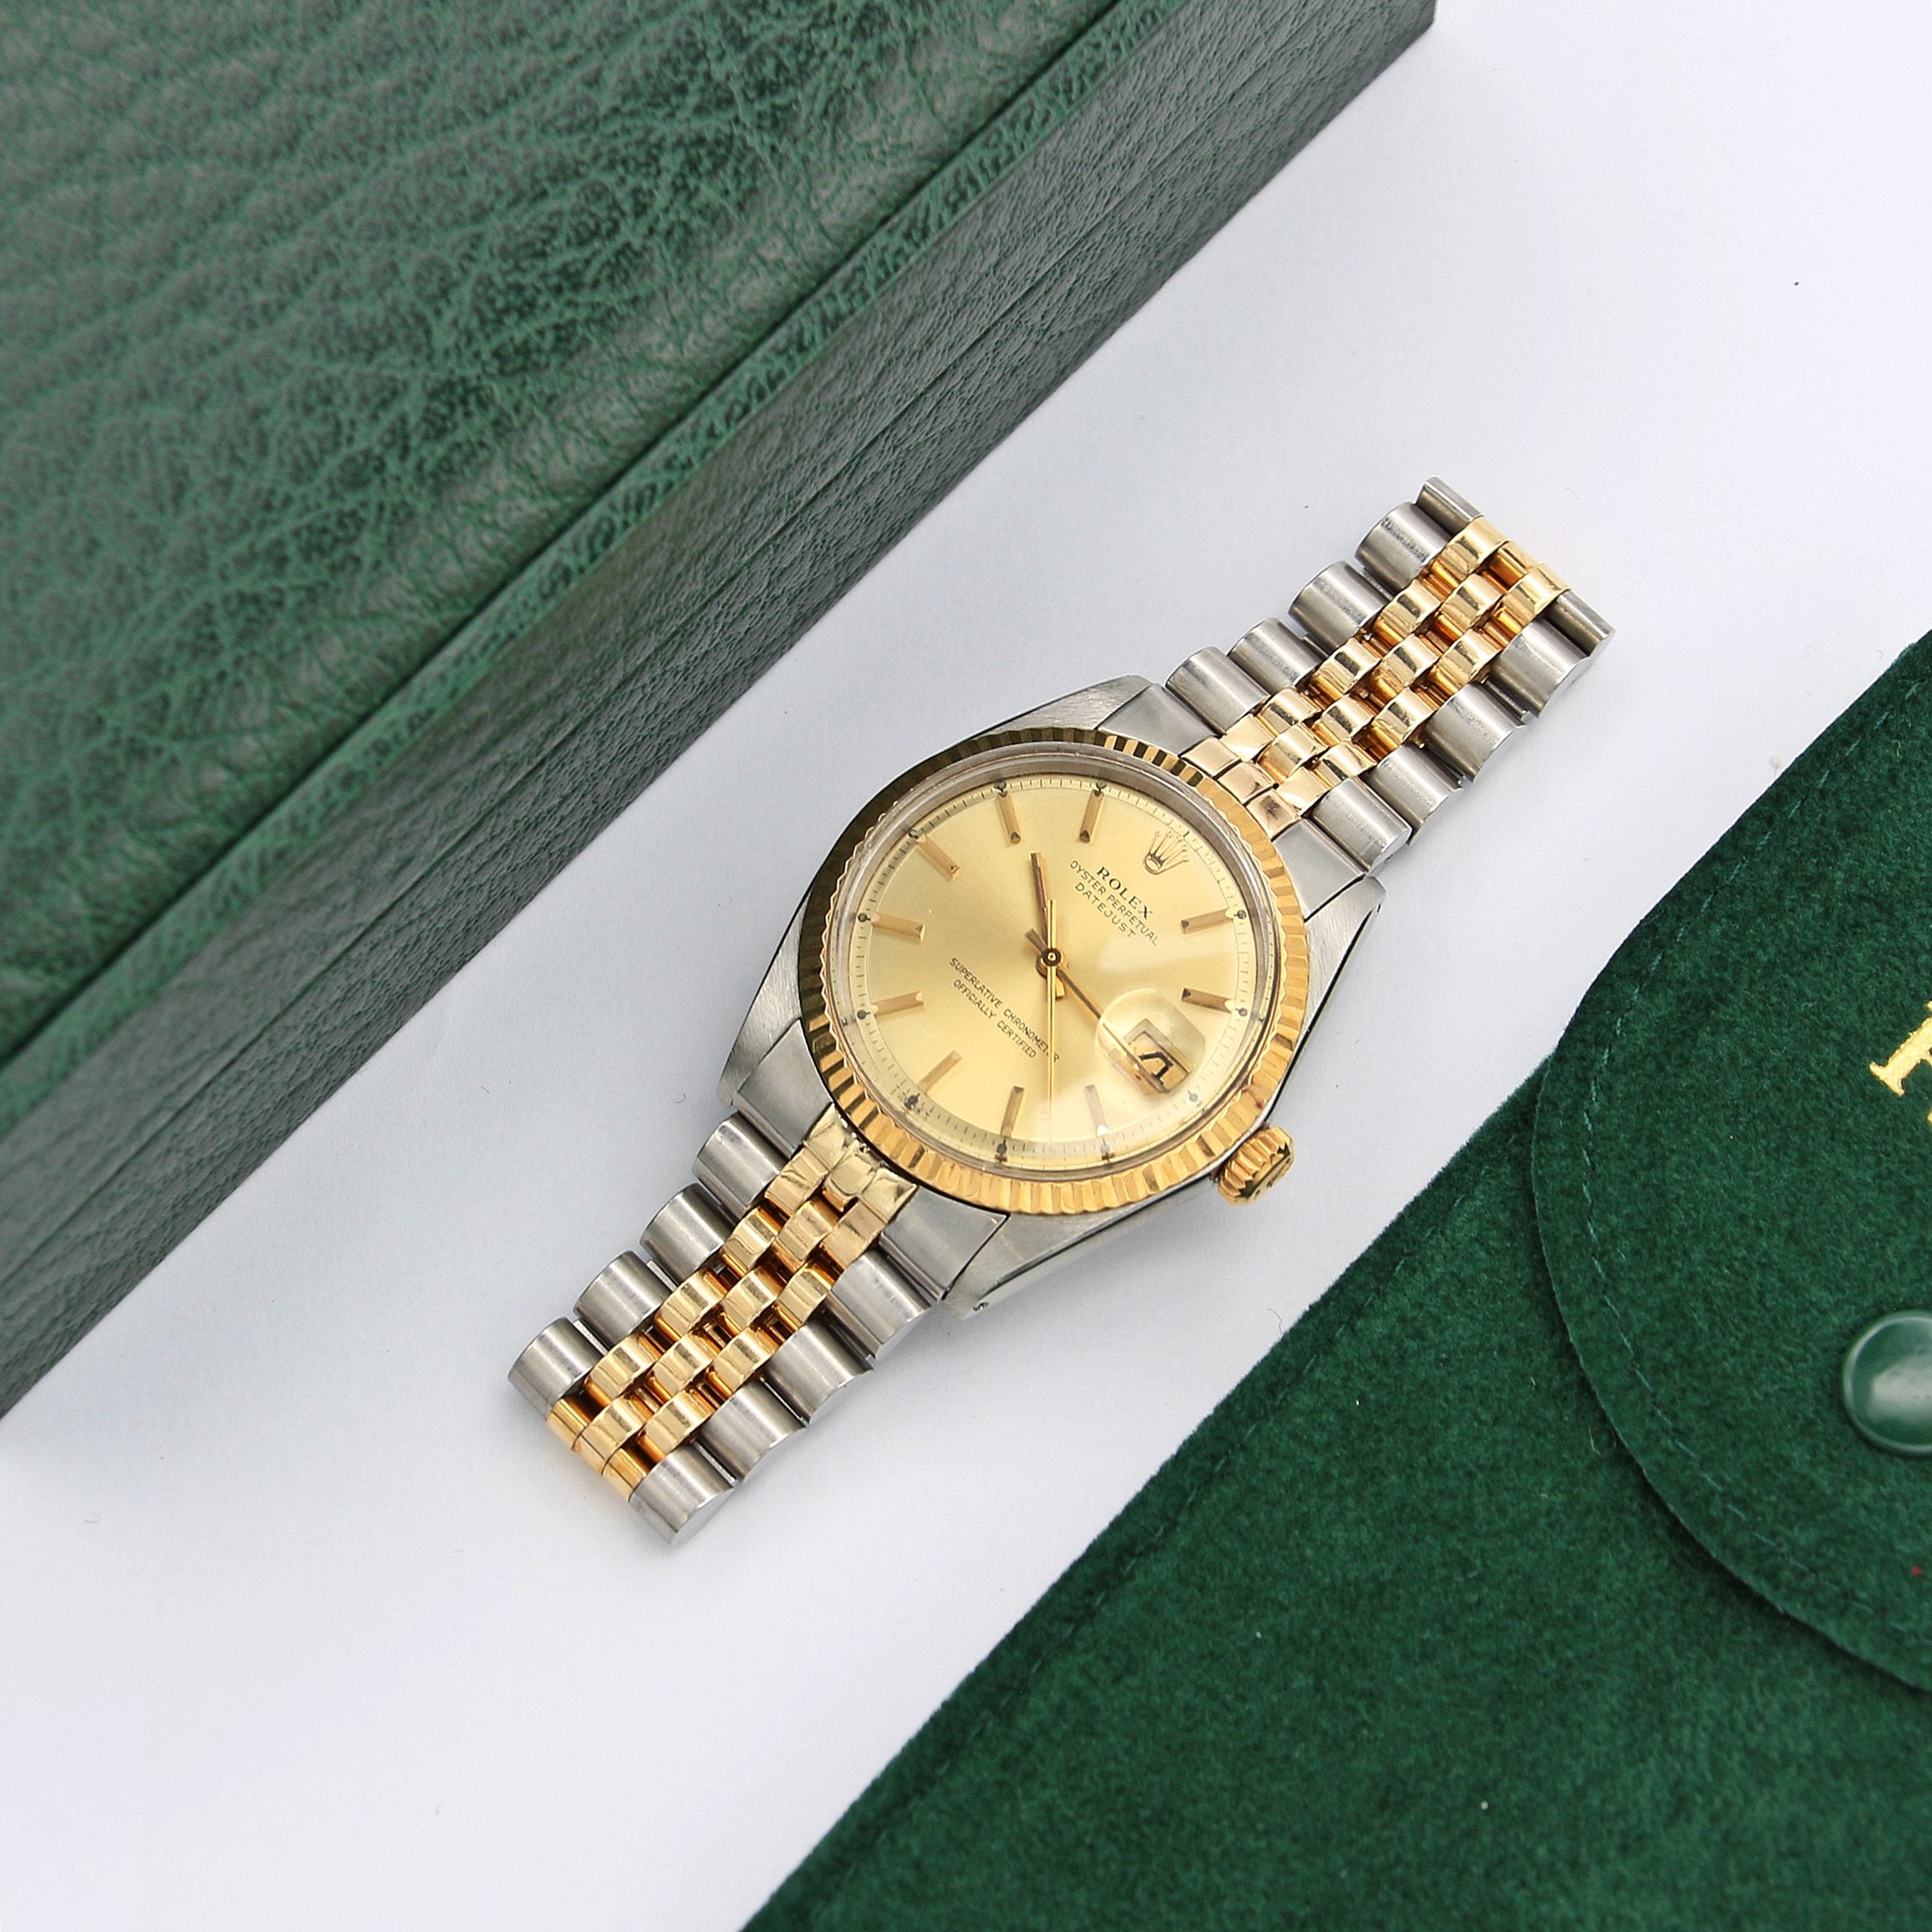 Rolex Datejust ref. 1601 - Steel/Yellow Gold - Champagne Dial